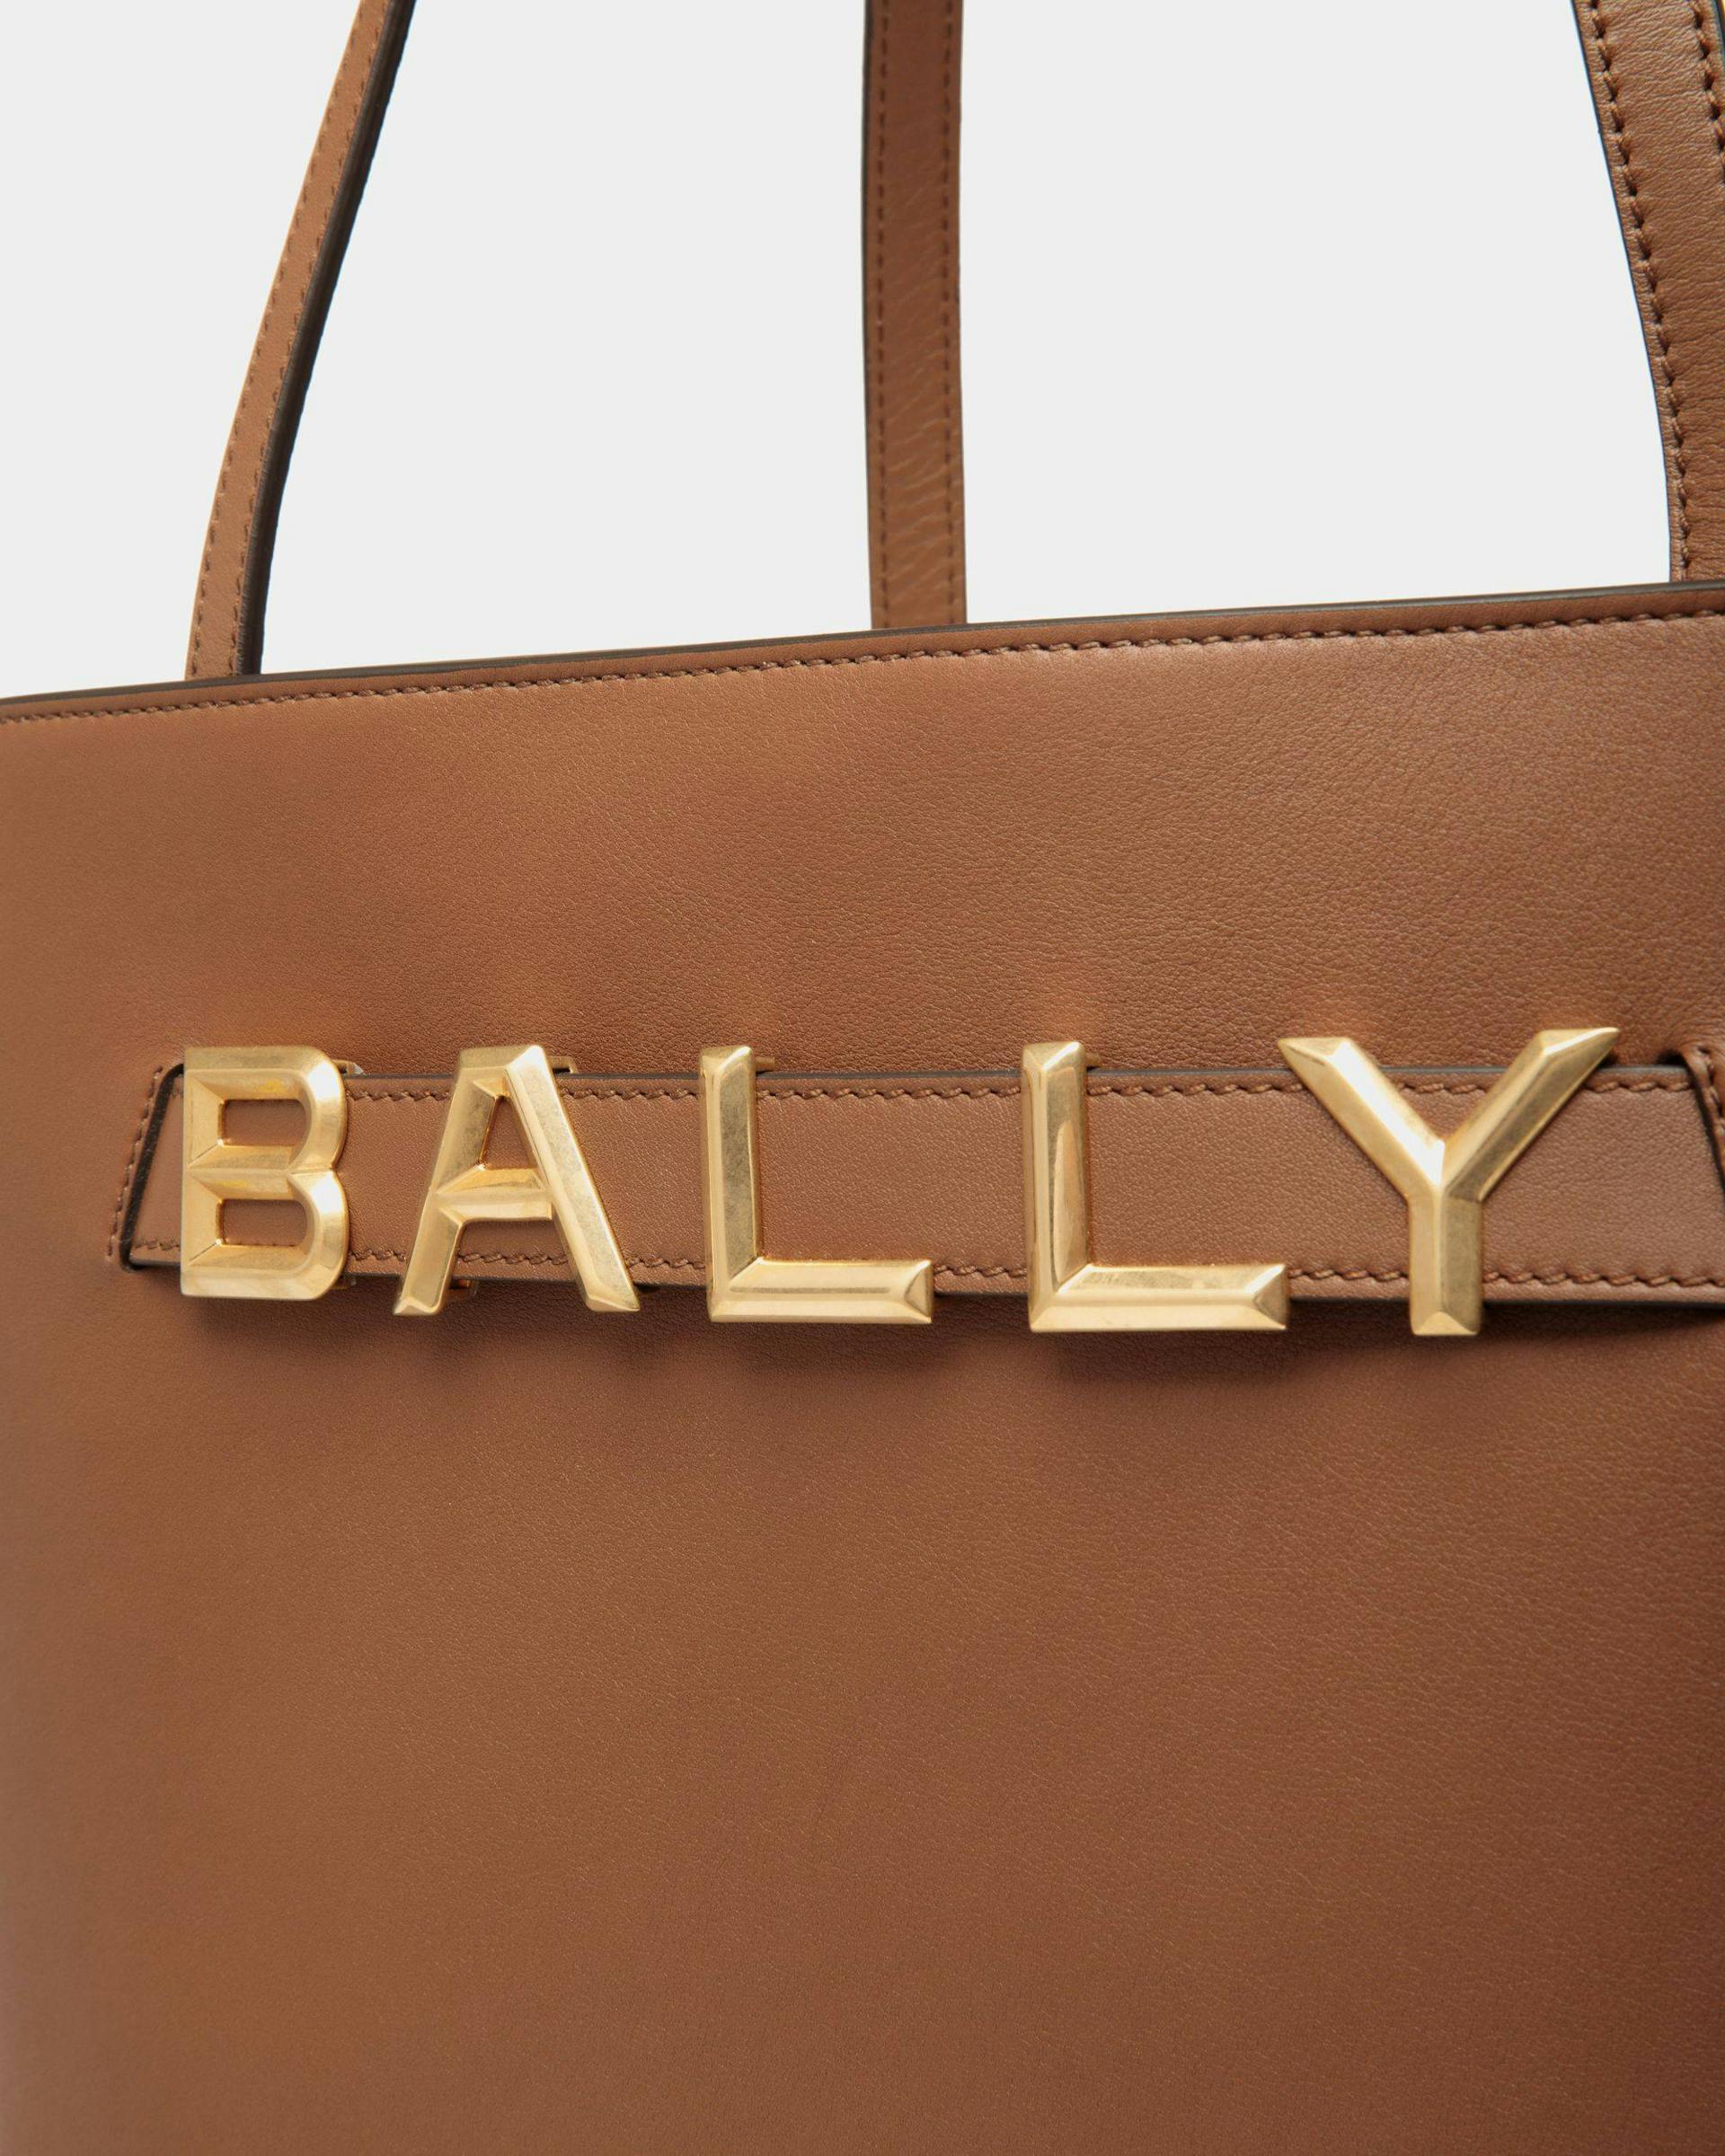 Bally Spell Tote Bag in Brown Leather - Women's - Bally - 05